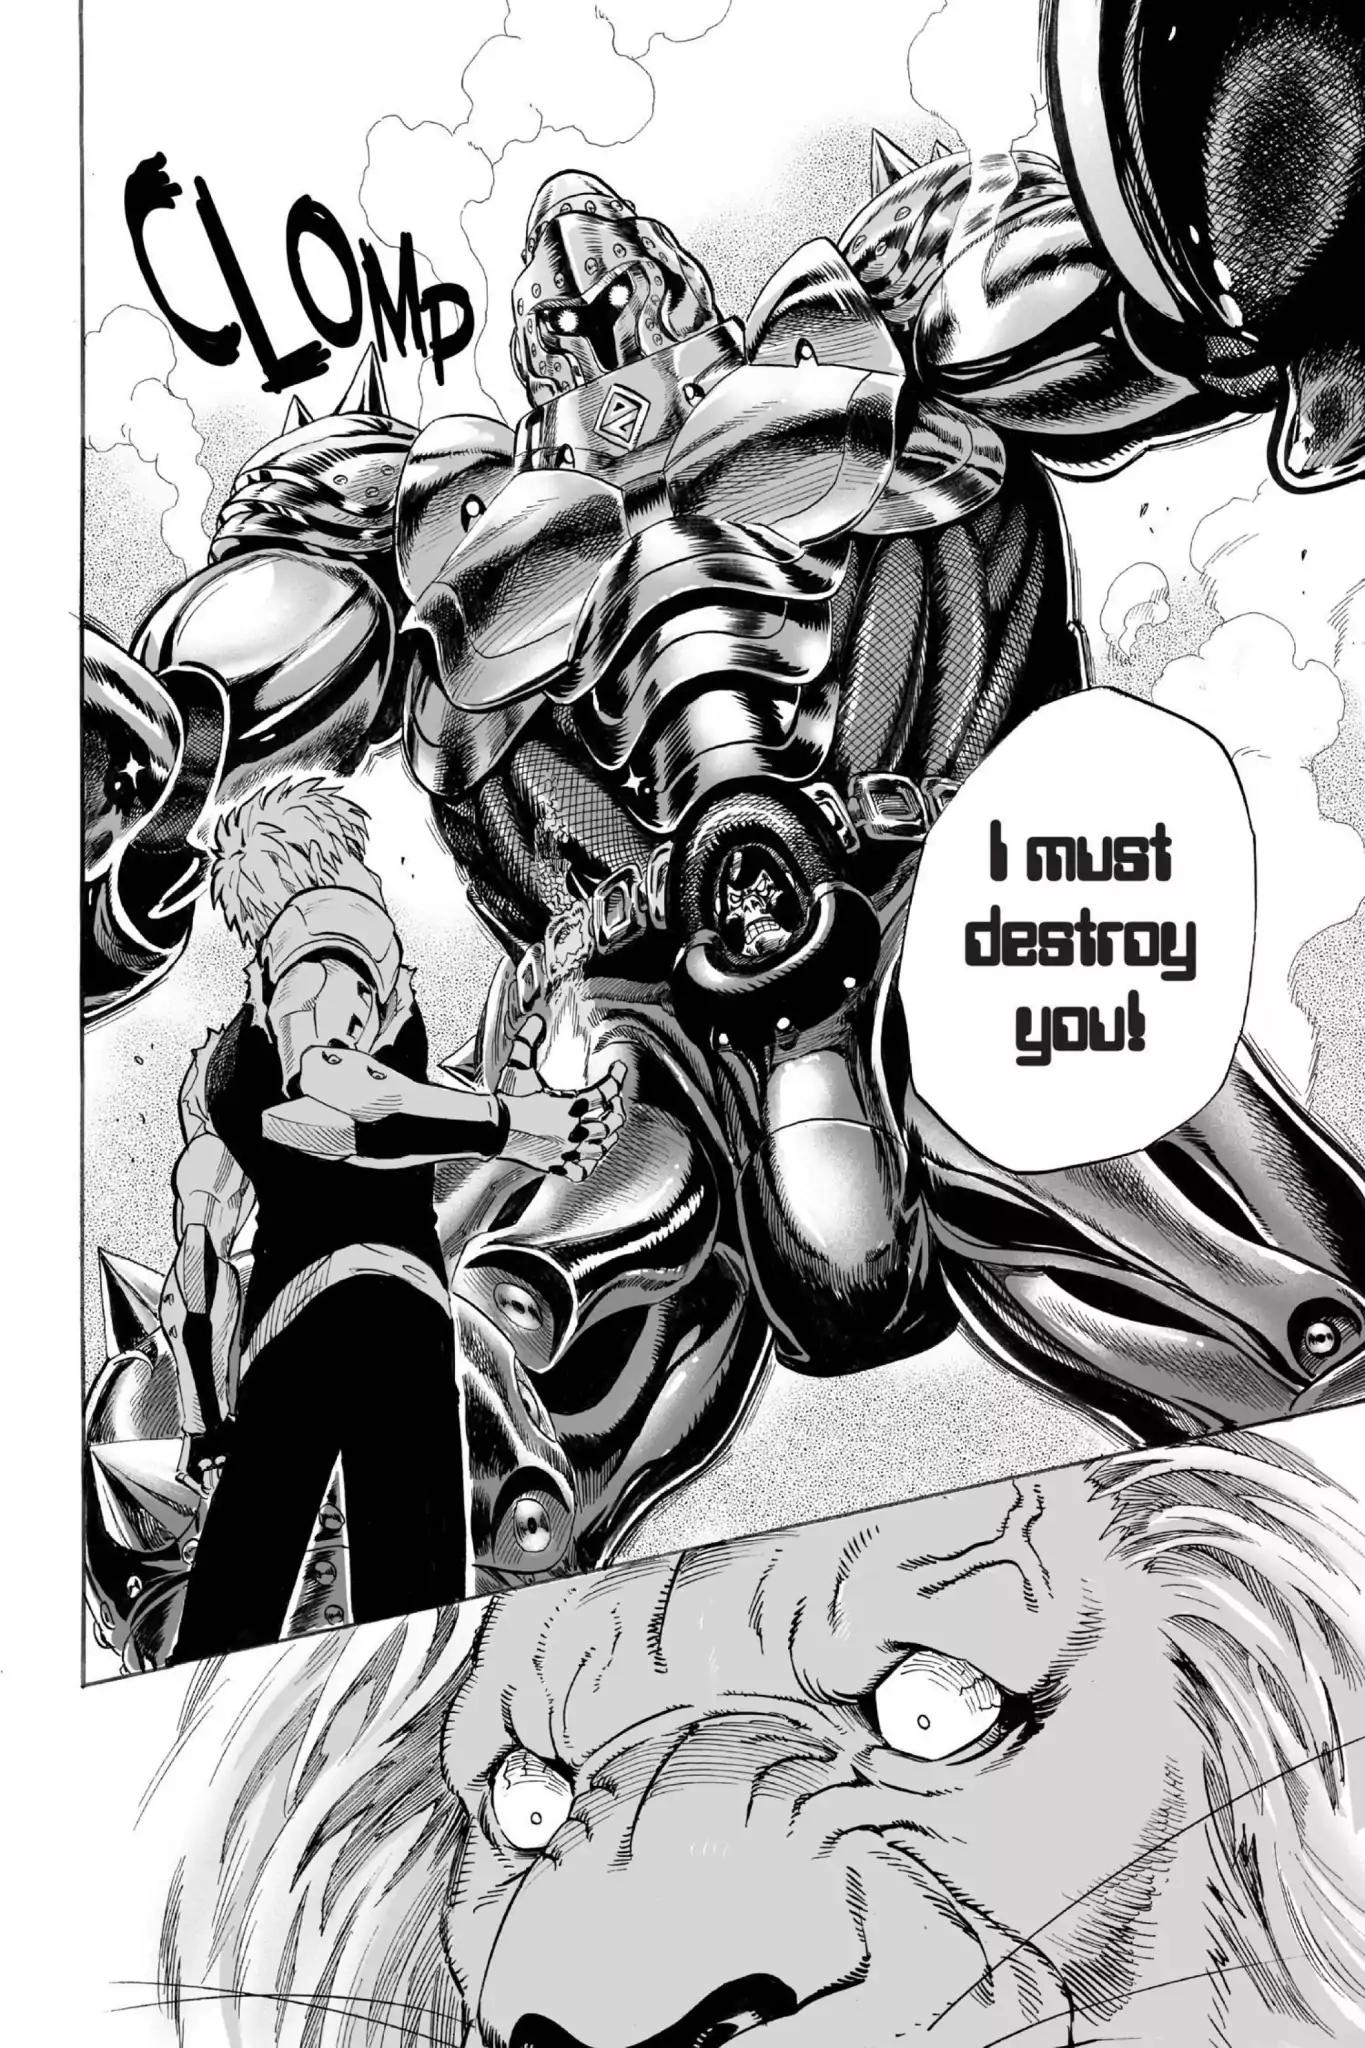 One Punch Man, Chapter 8 This Guy image 10